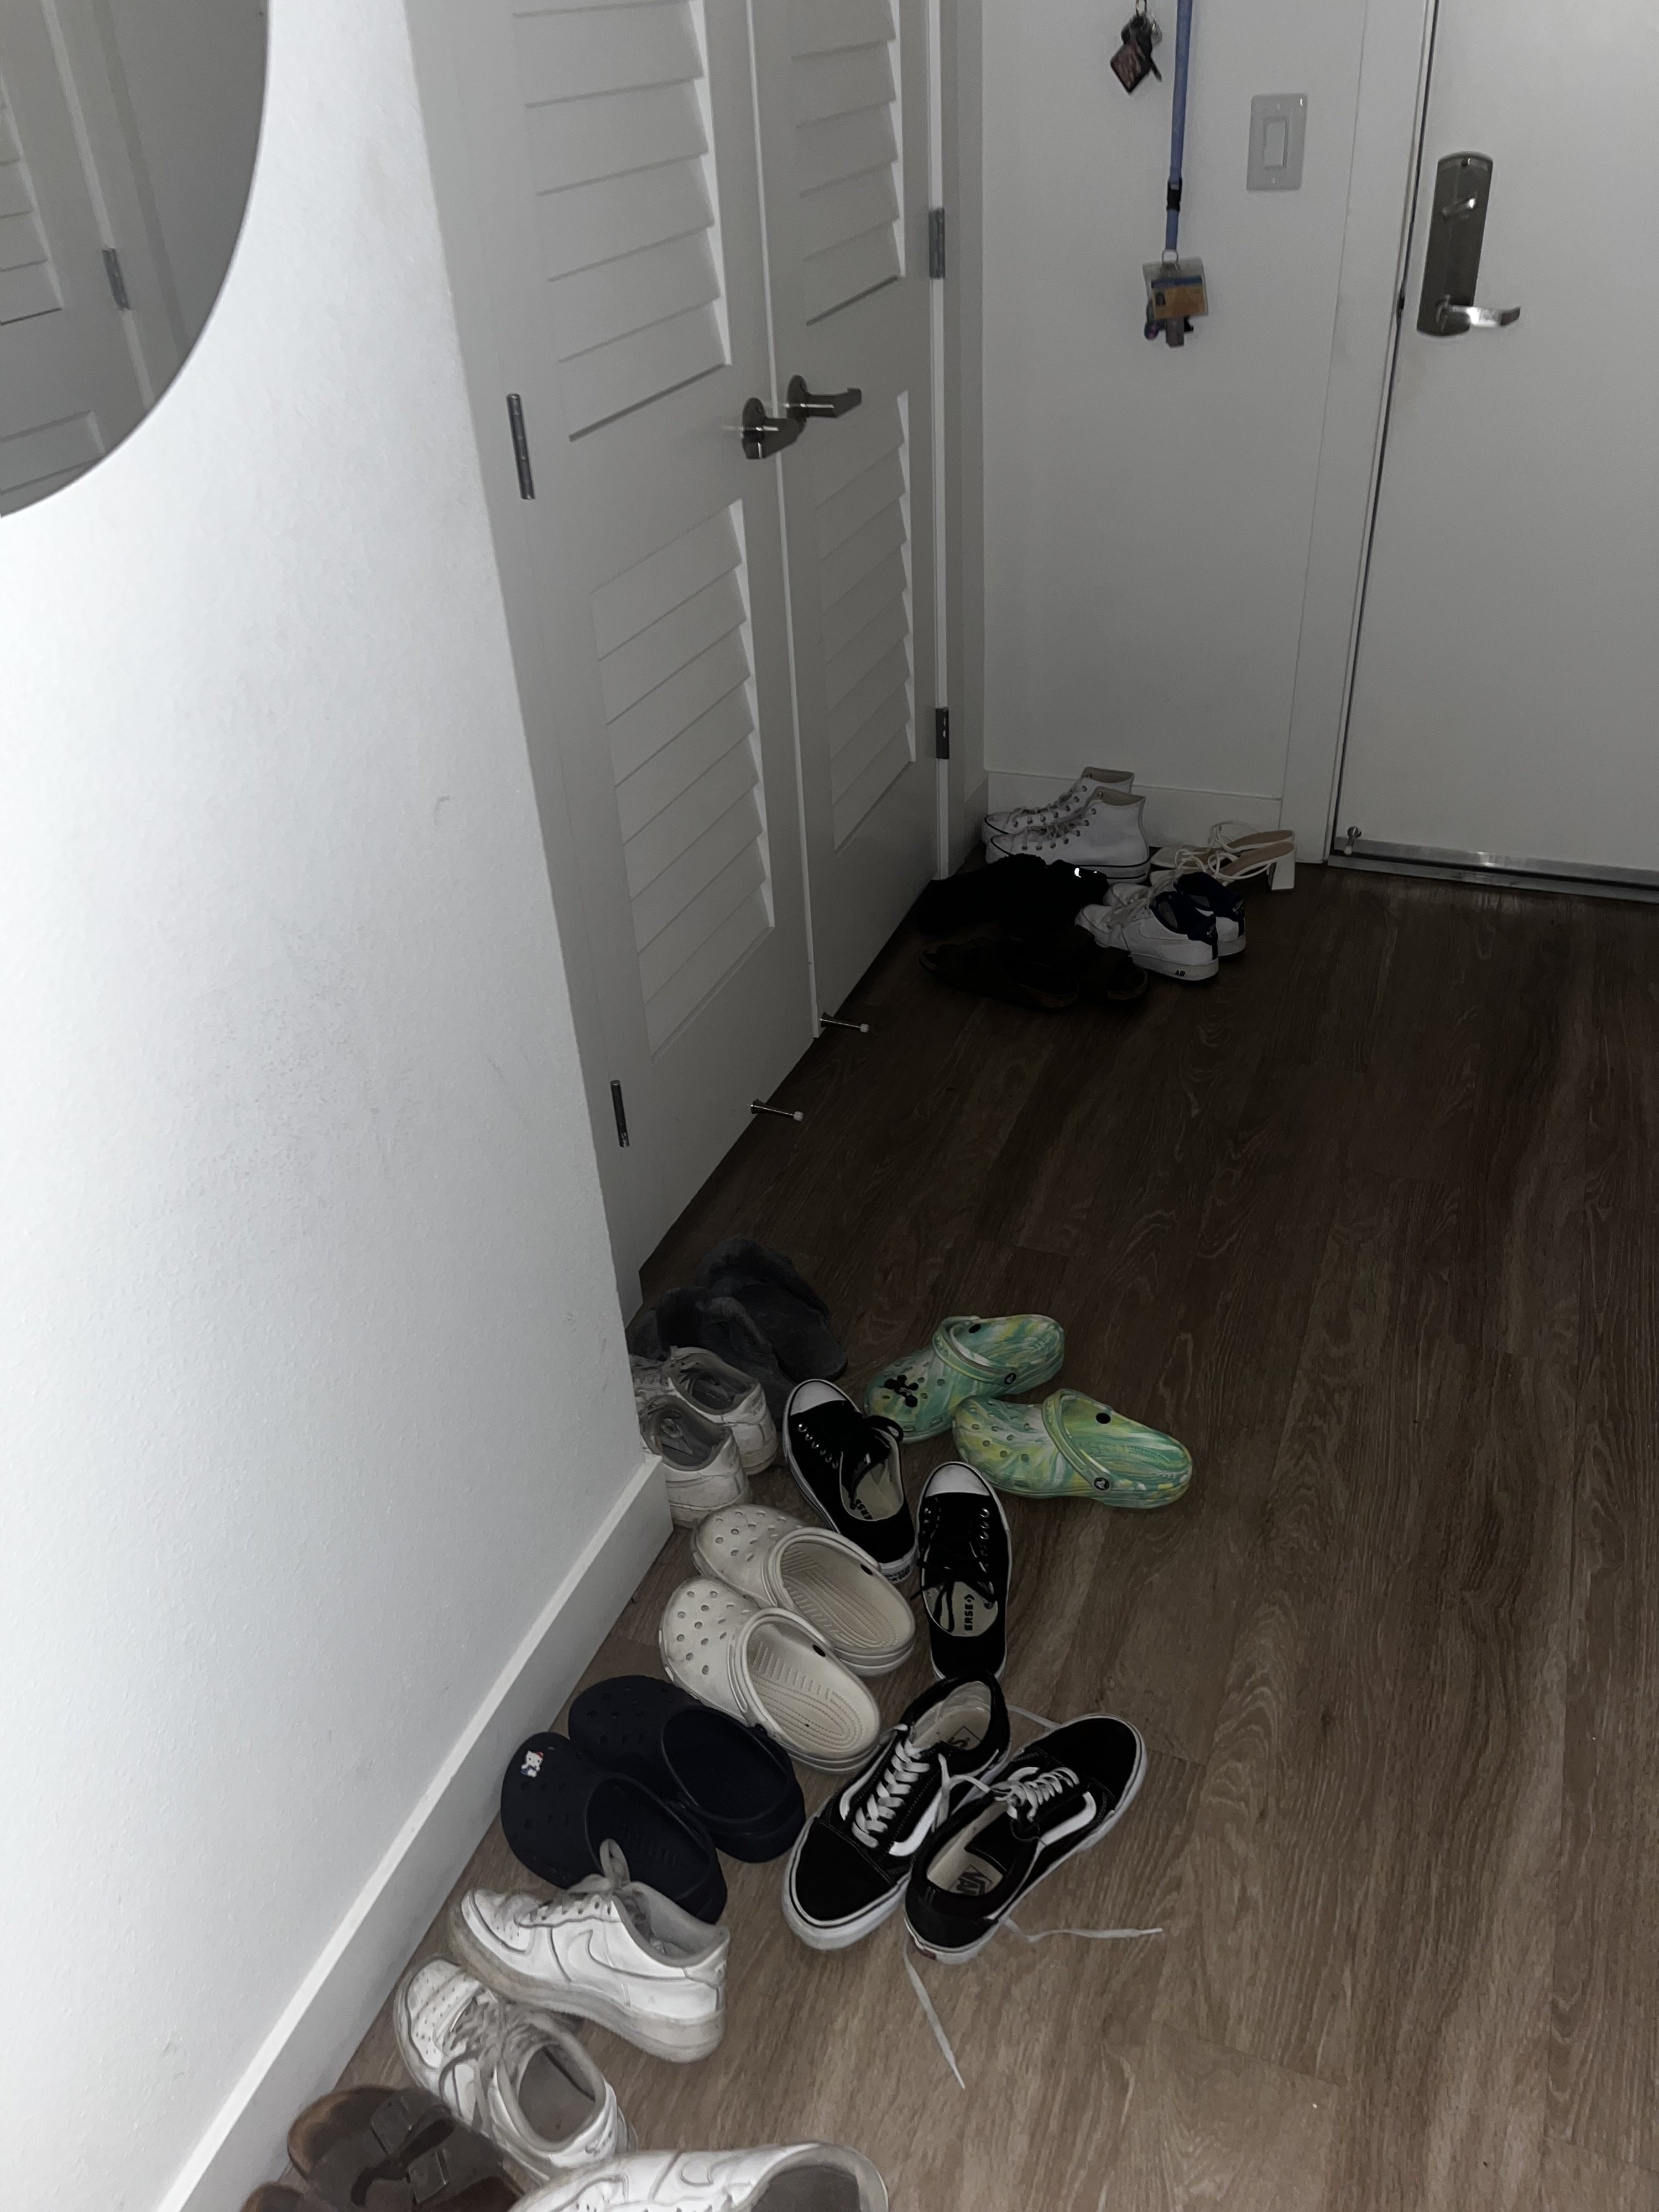 Pairs of shoes near the door